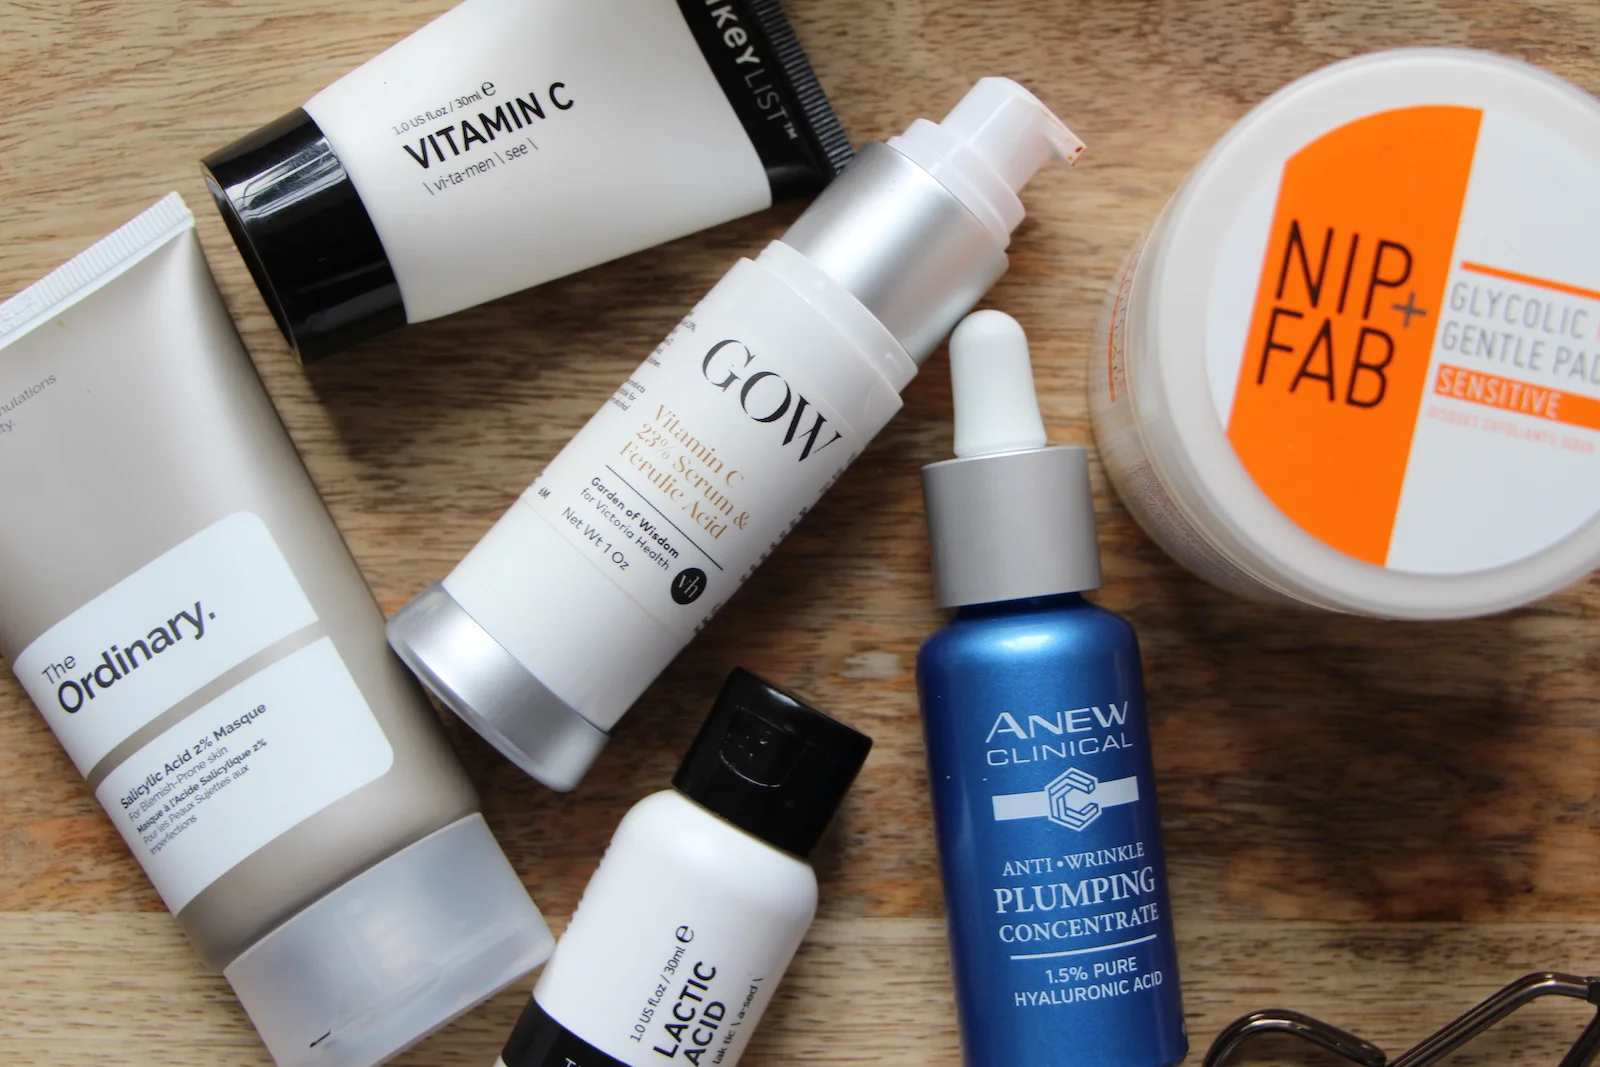 Budget Skincare That Really Works